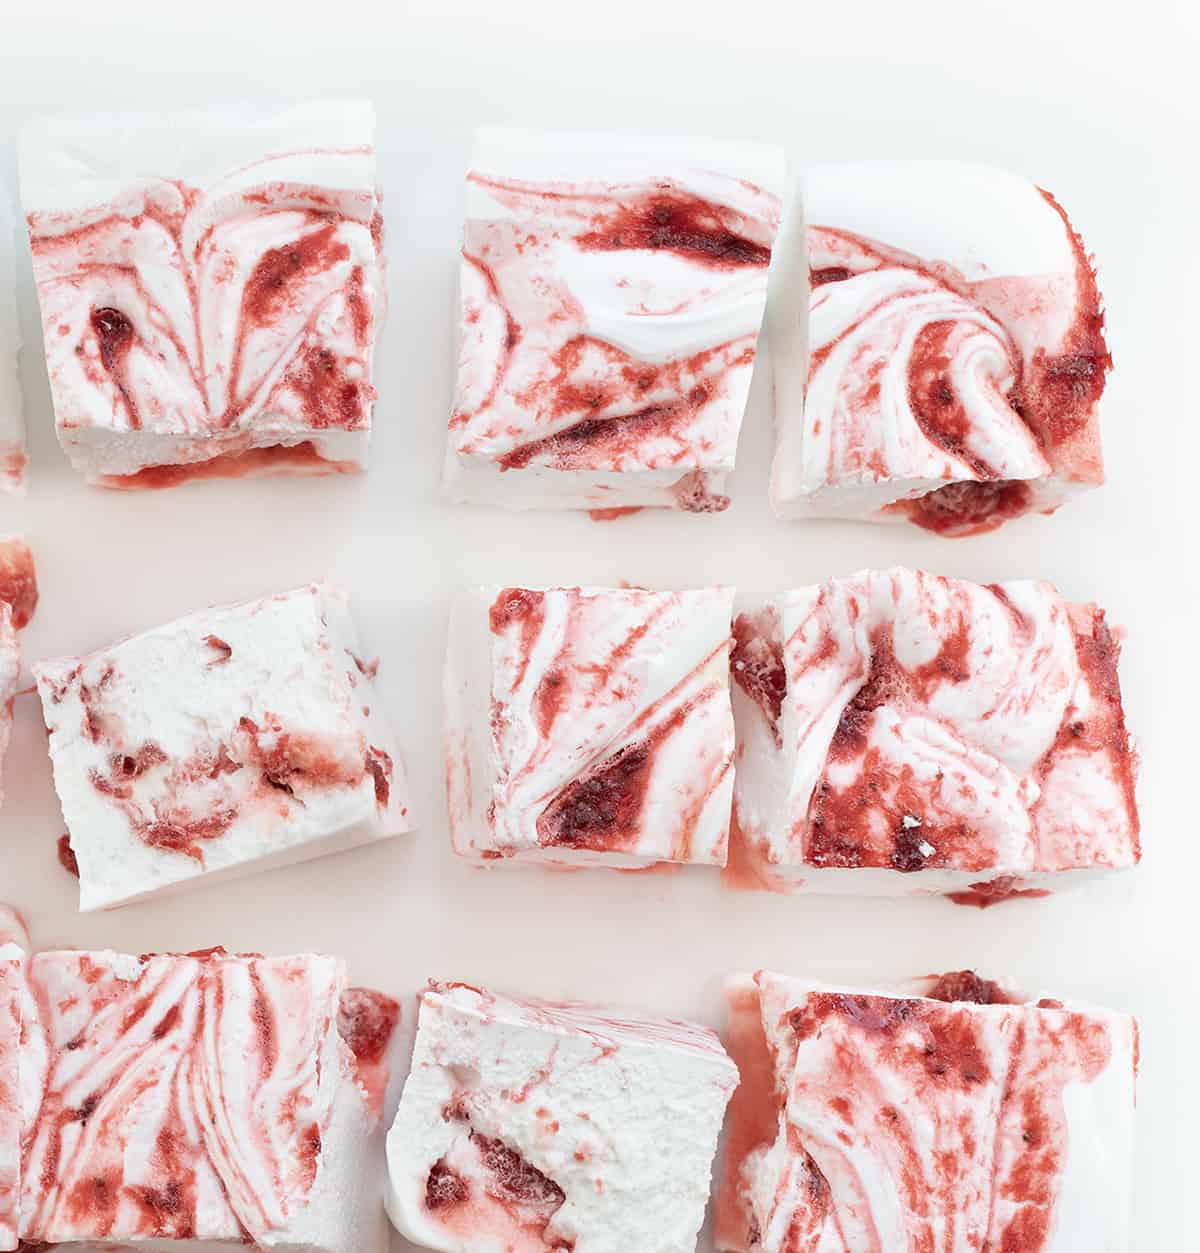 Strawberry Marshmallows from Overhead Cut into Pieces and on a White Counter.